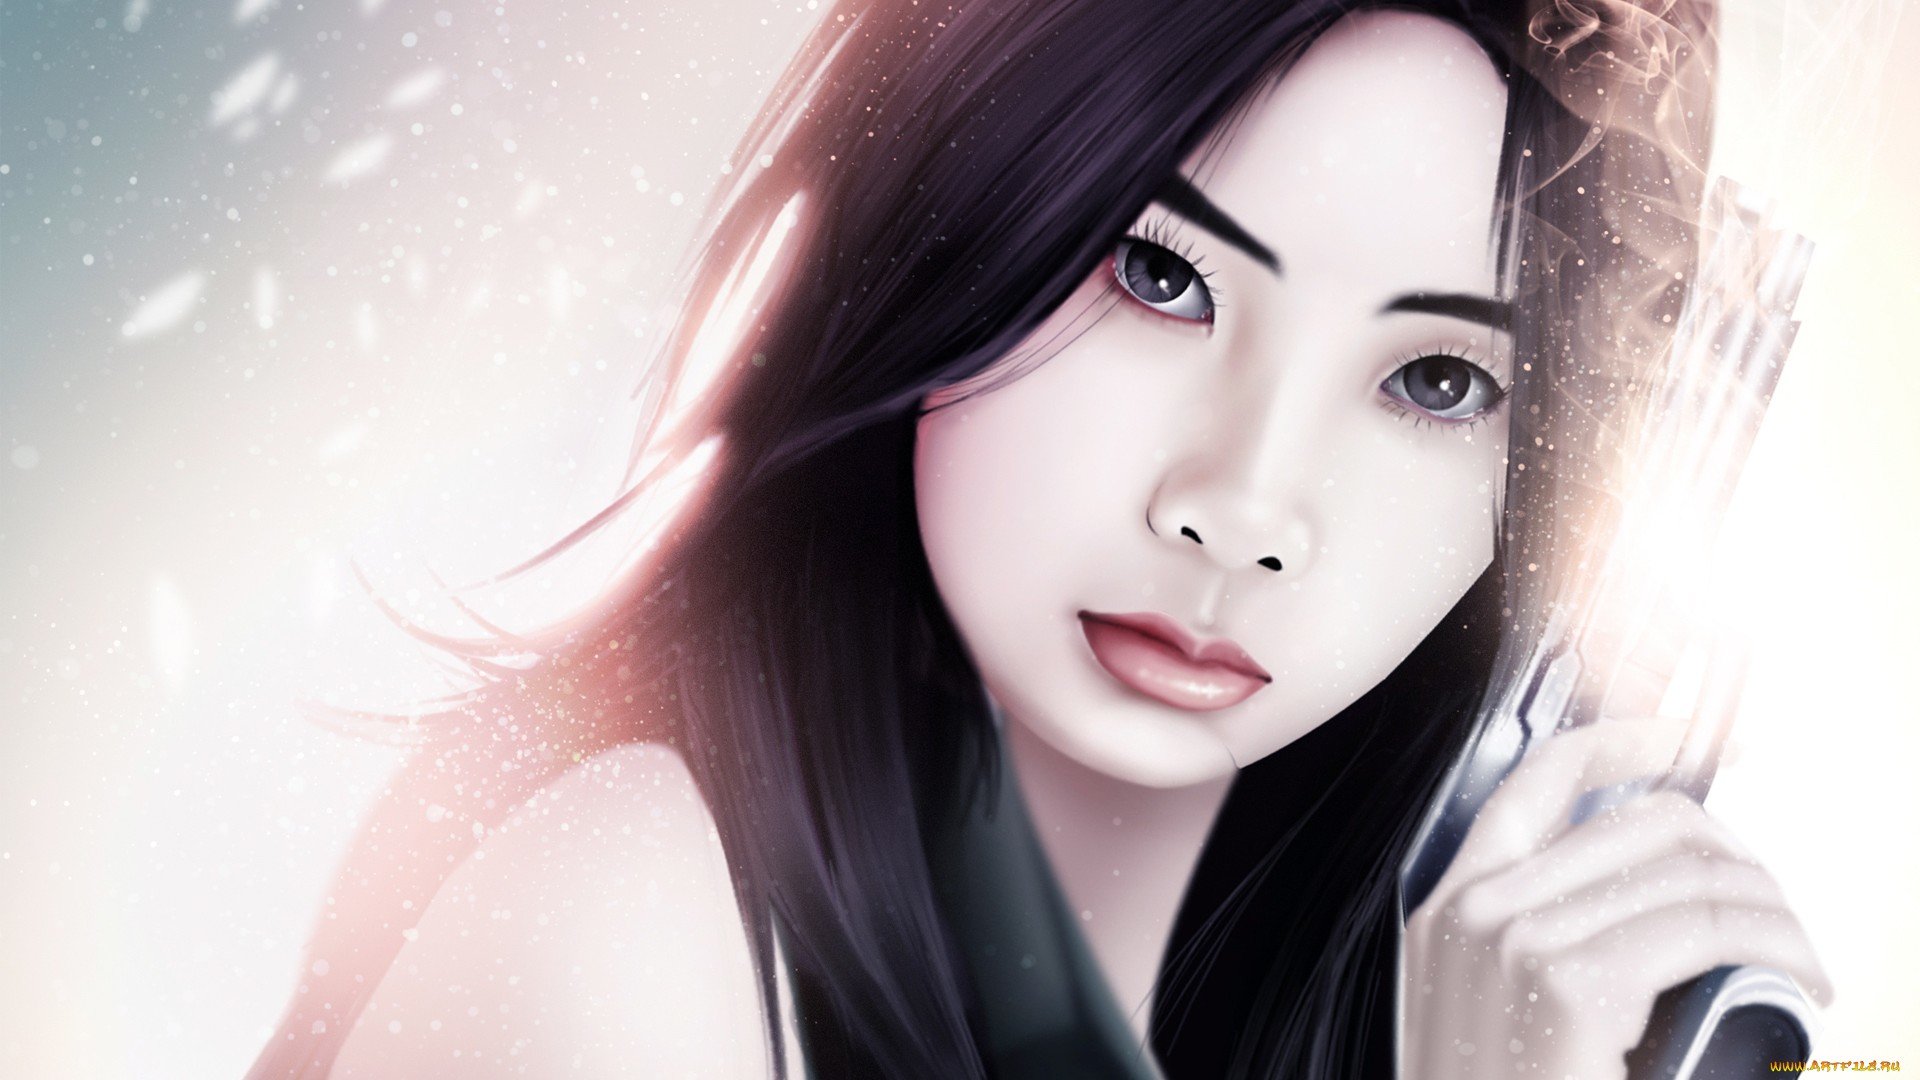 Download full hd Fantasy girl PC background ID:336837 for free